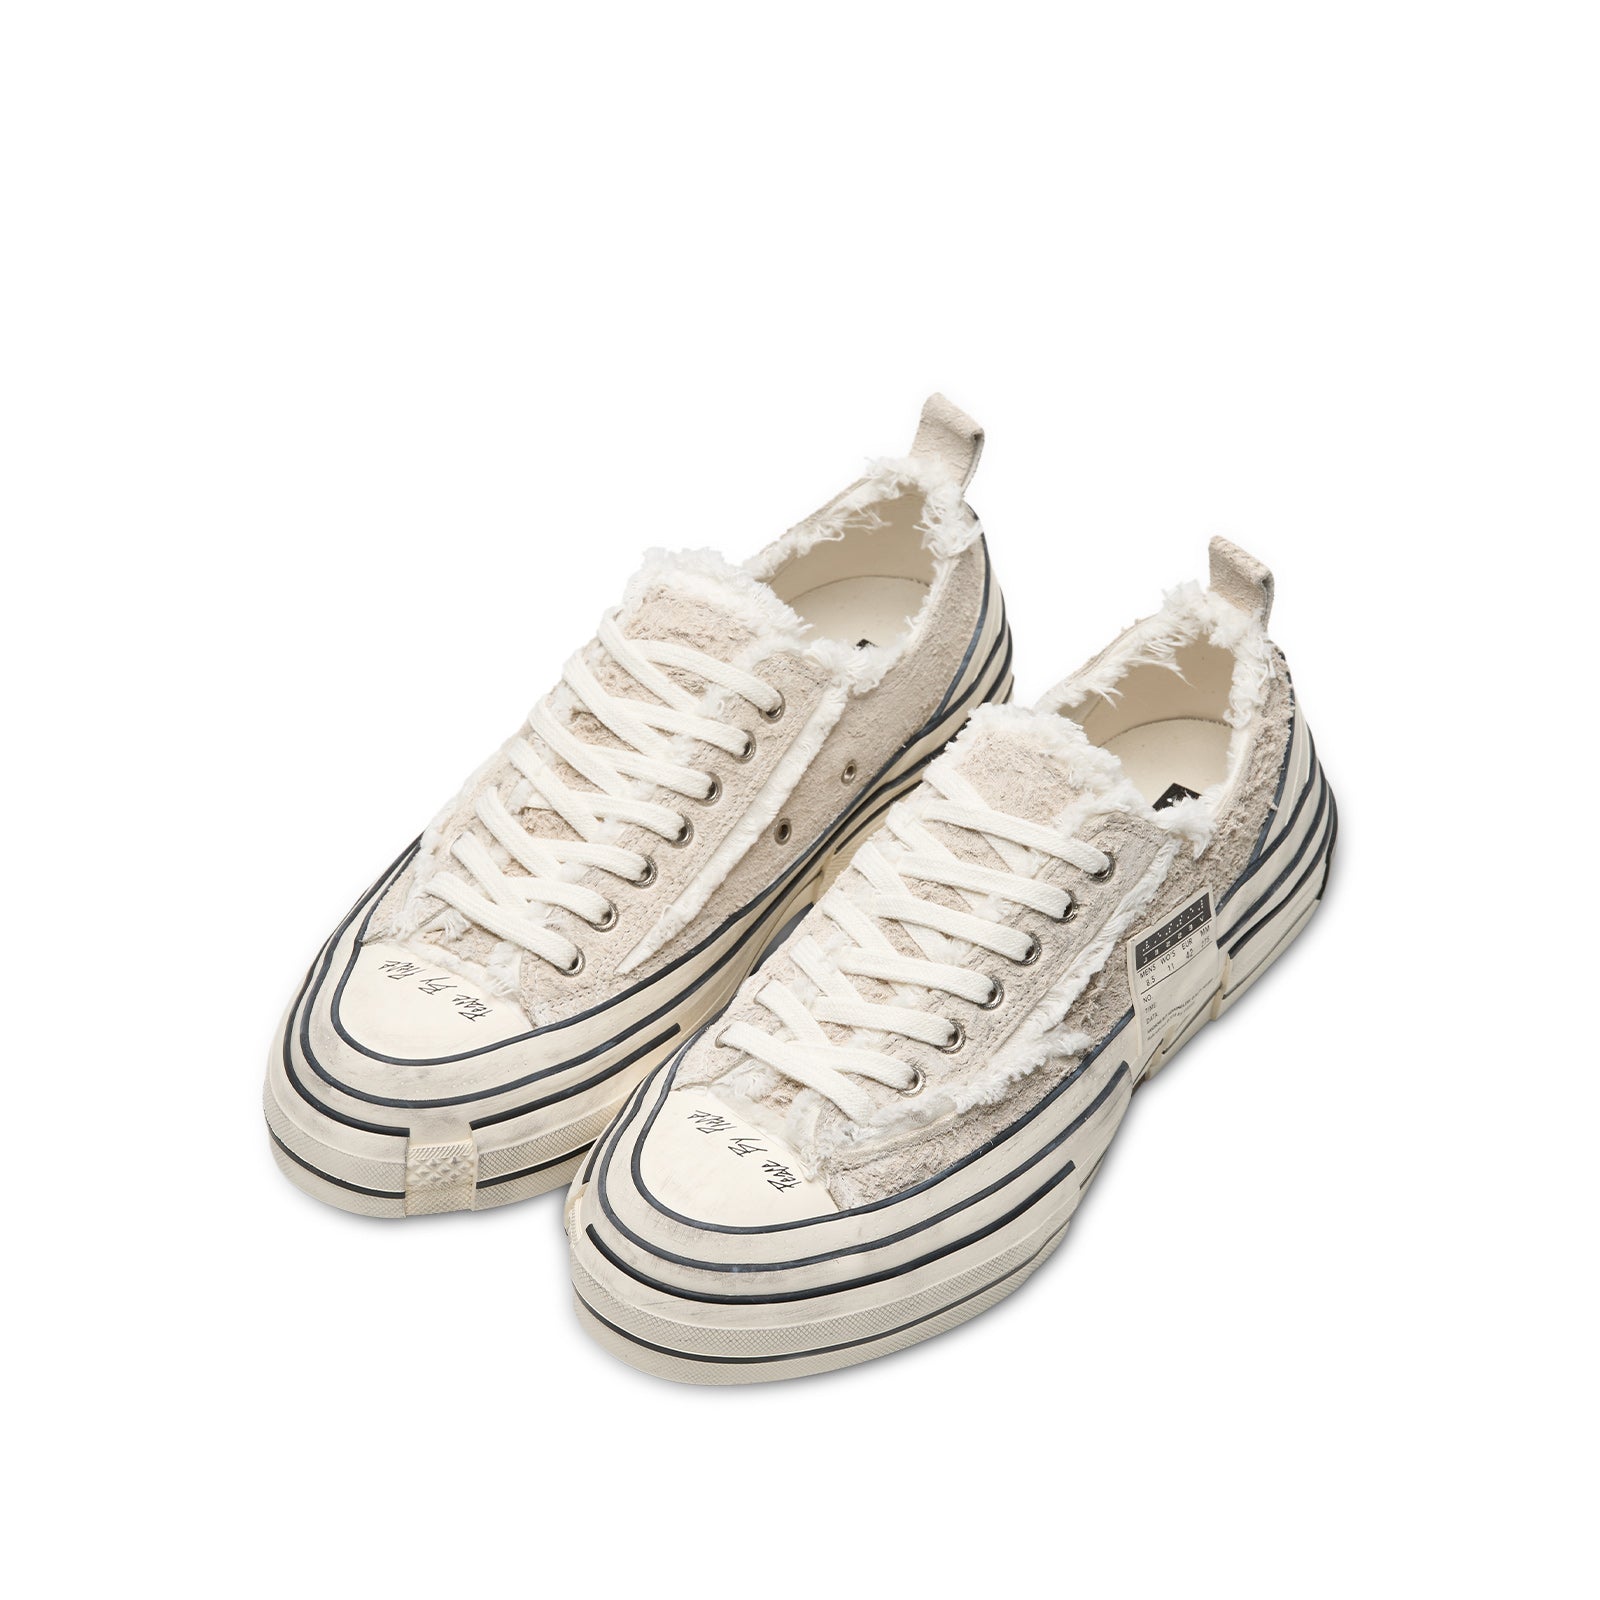 xVESSEL Lows White Suede